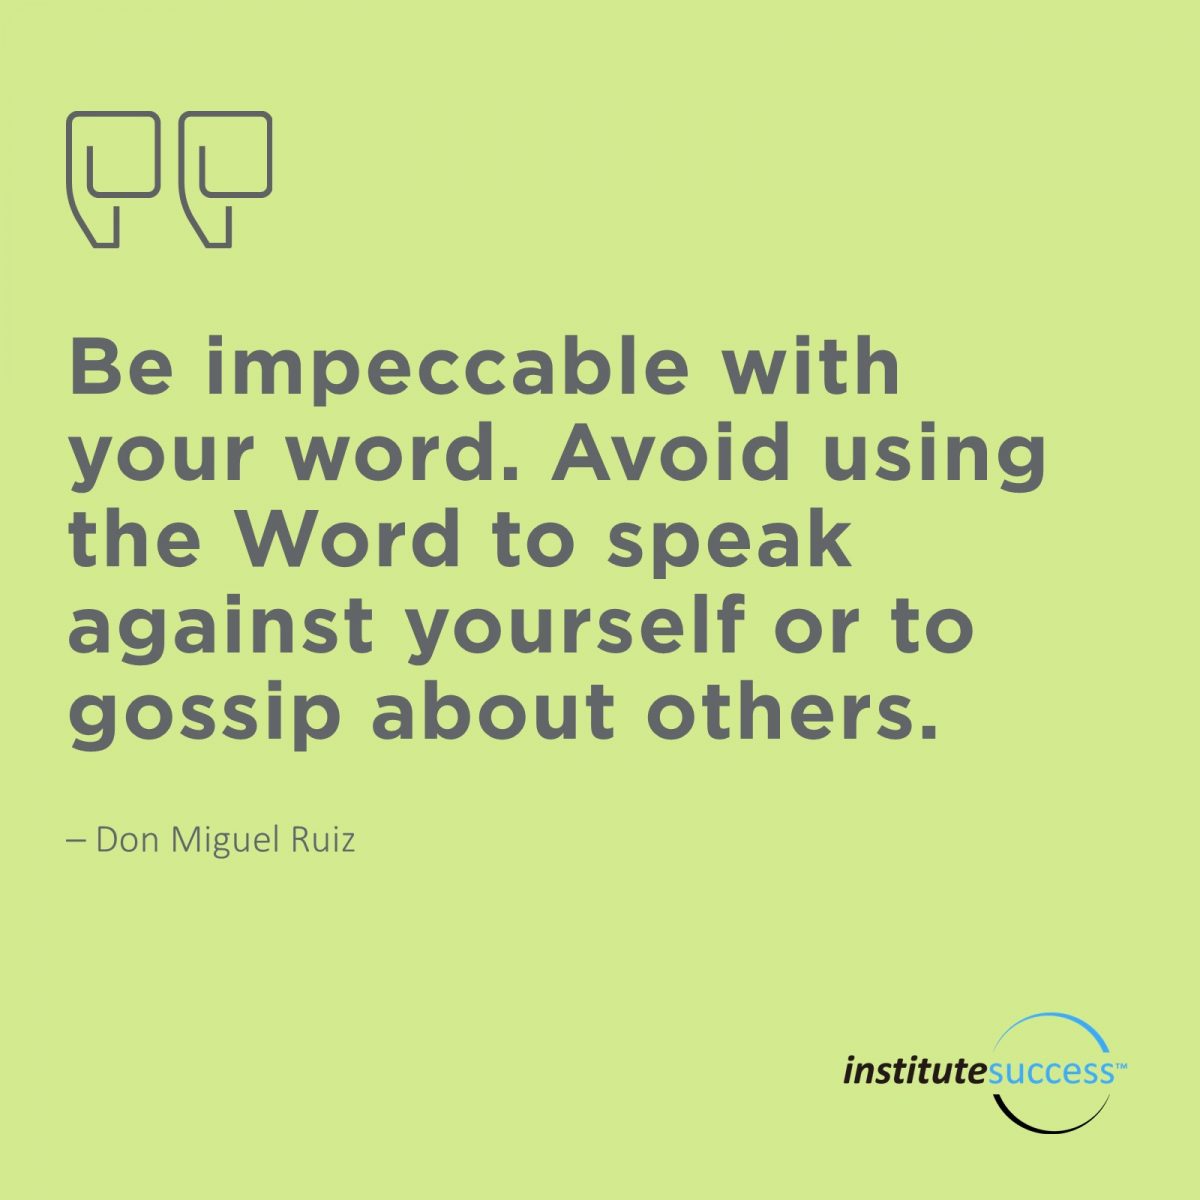 Be impeccable with your word. Avoid using the Word to speak against yourself or to gossip about others – Don Miguel Ruiz